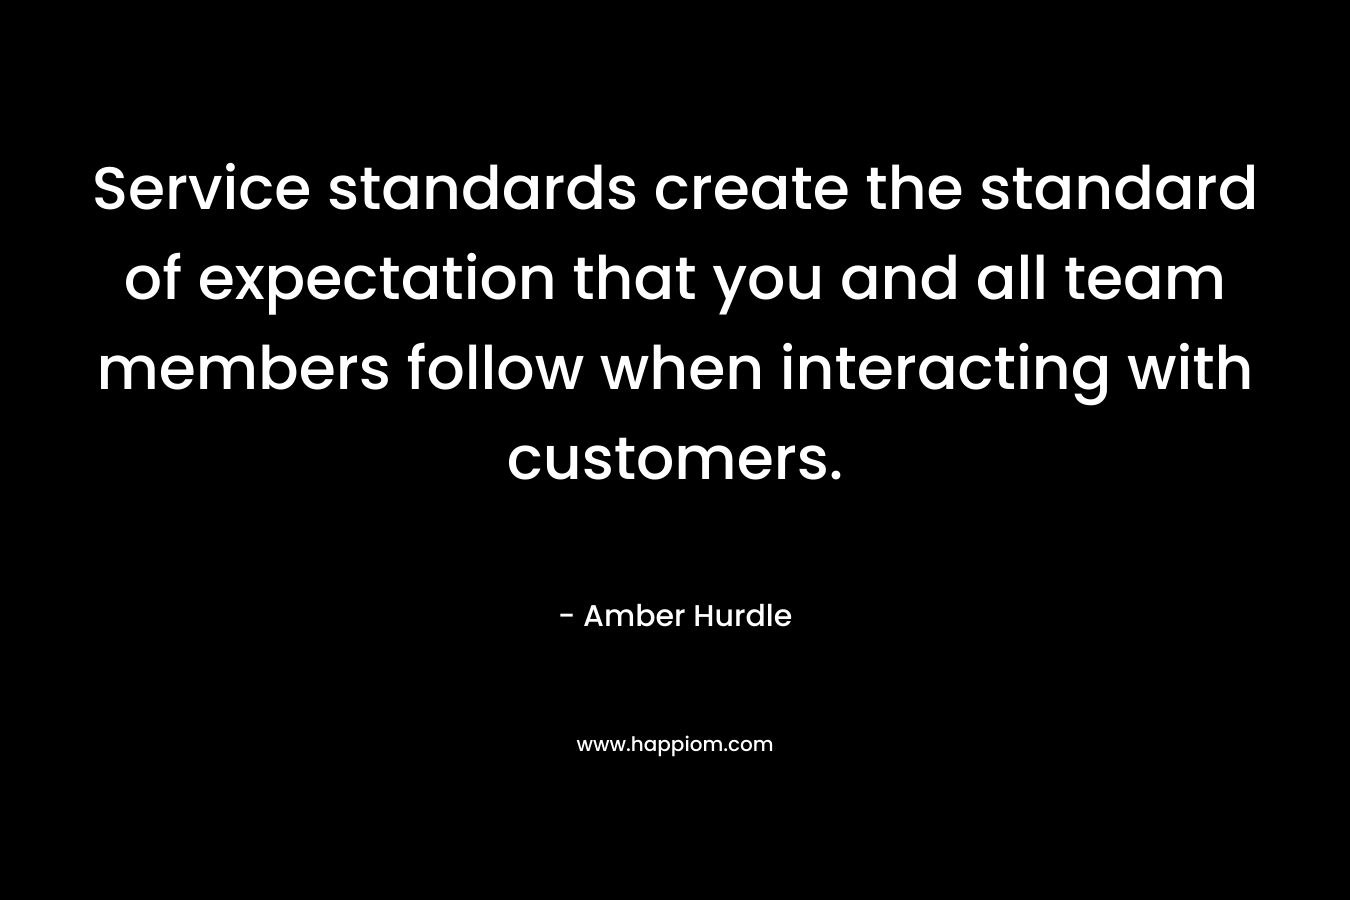 Service standards create the standard of expectation that you and all team members follow when interacting with customers.